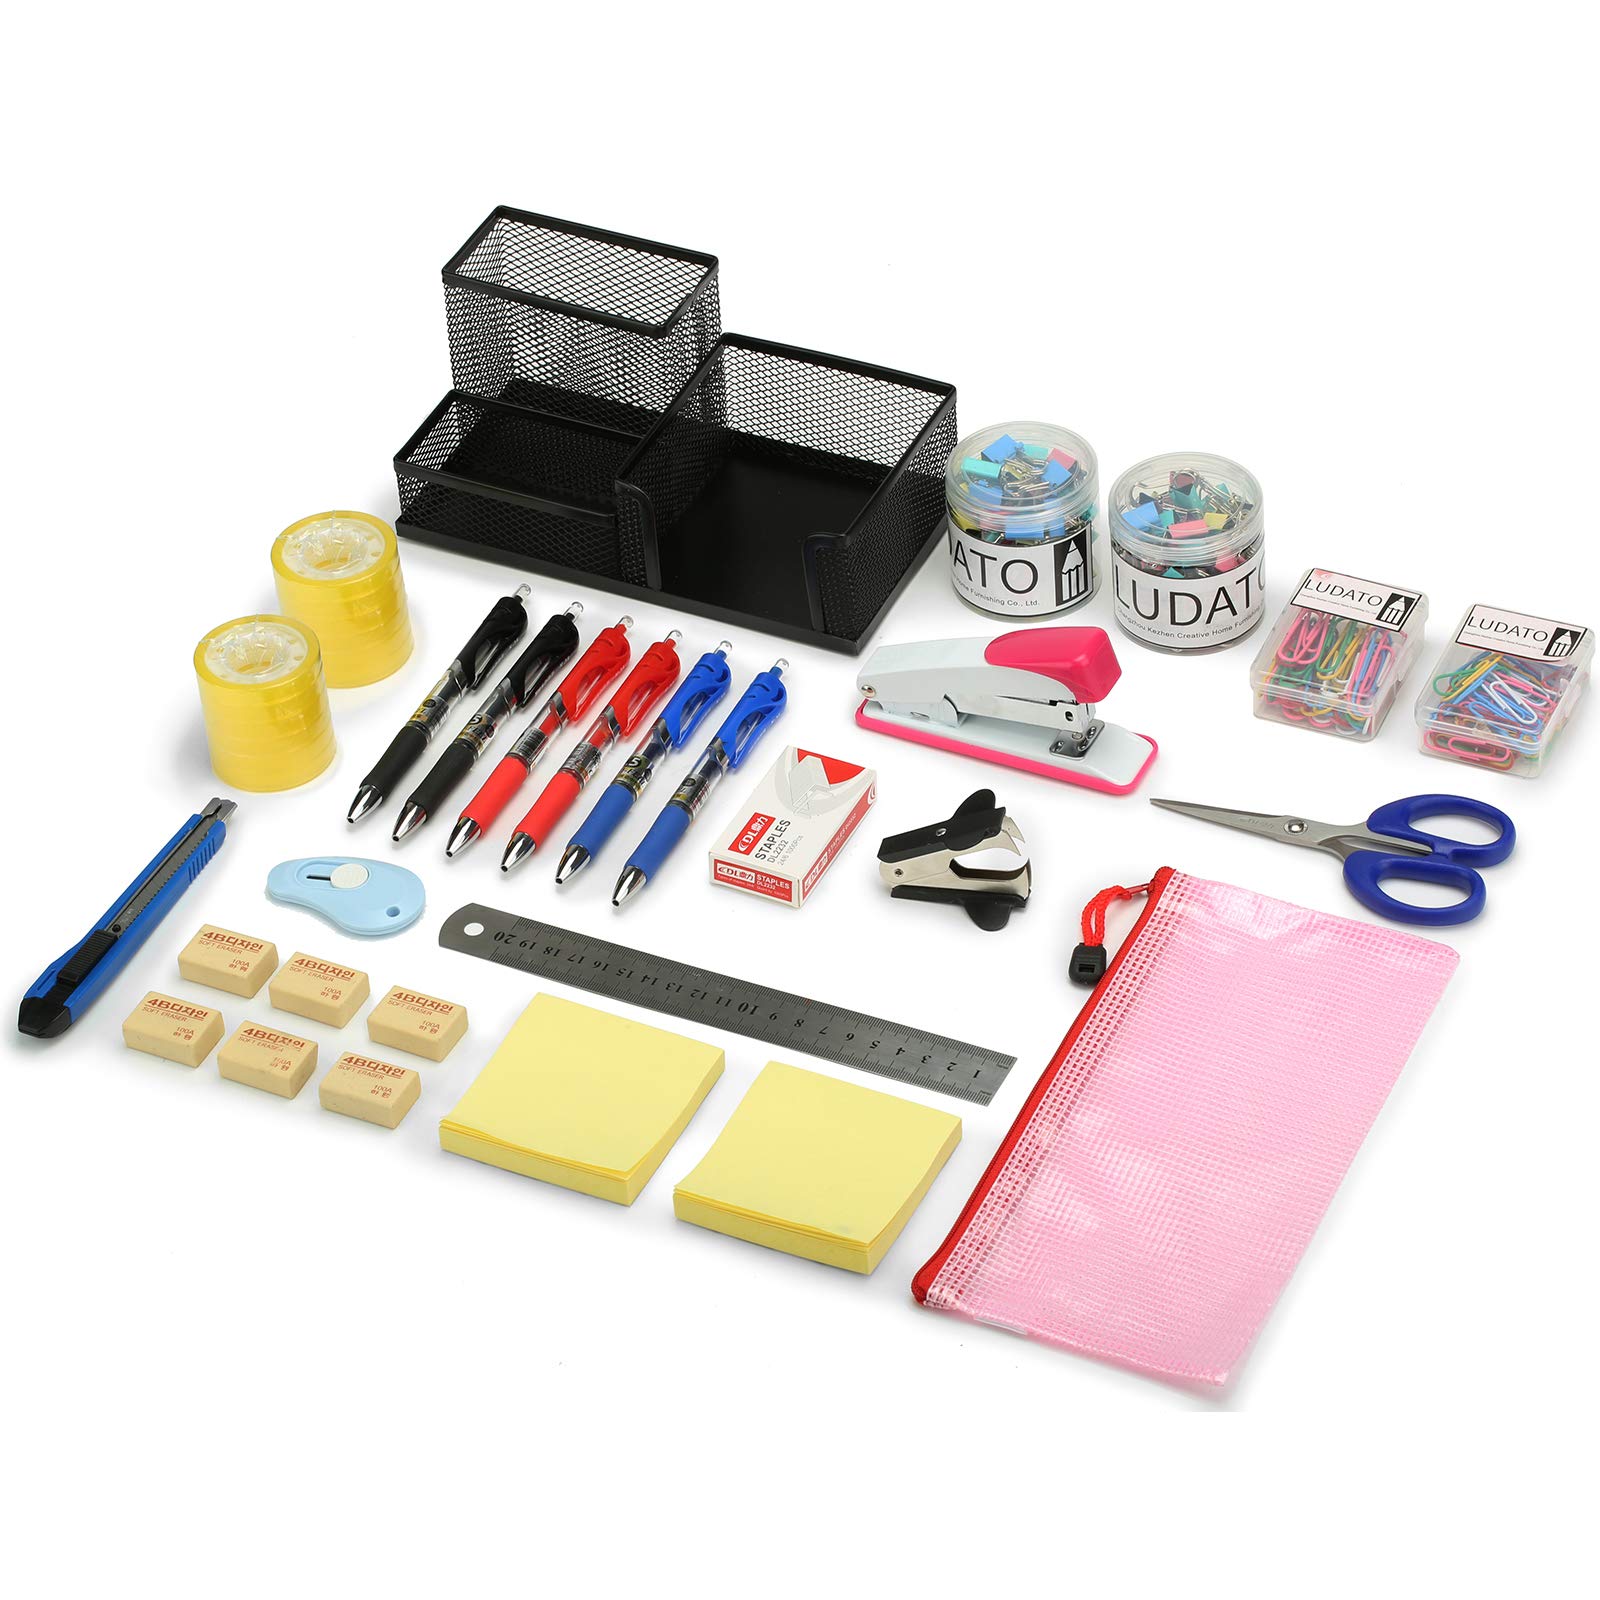 office supplies - 15 suggestions curated by @kt80belle